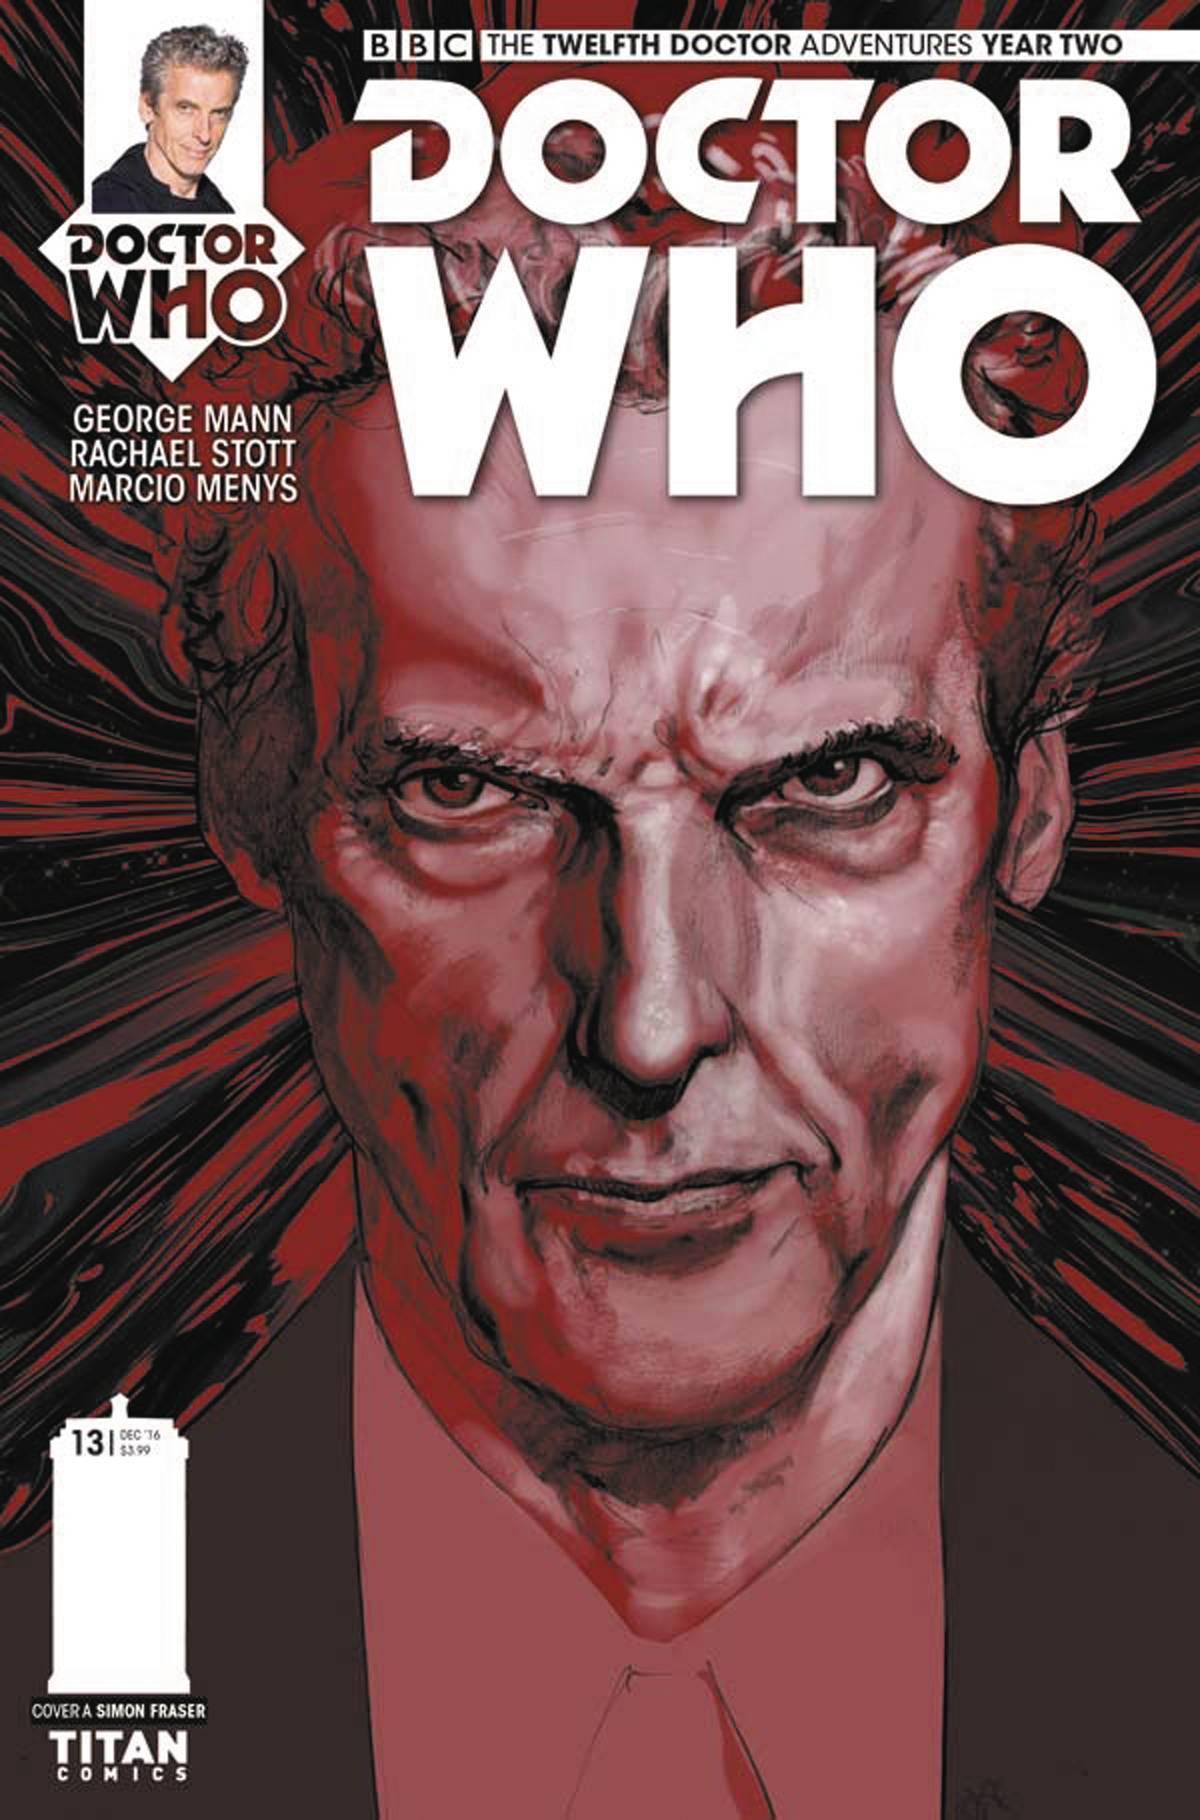 DOCTOR WHO 12TH YEAR TWO #13 - Kings Comics